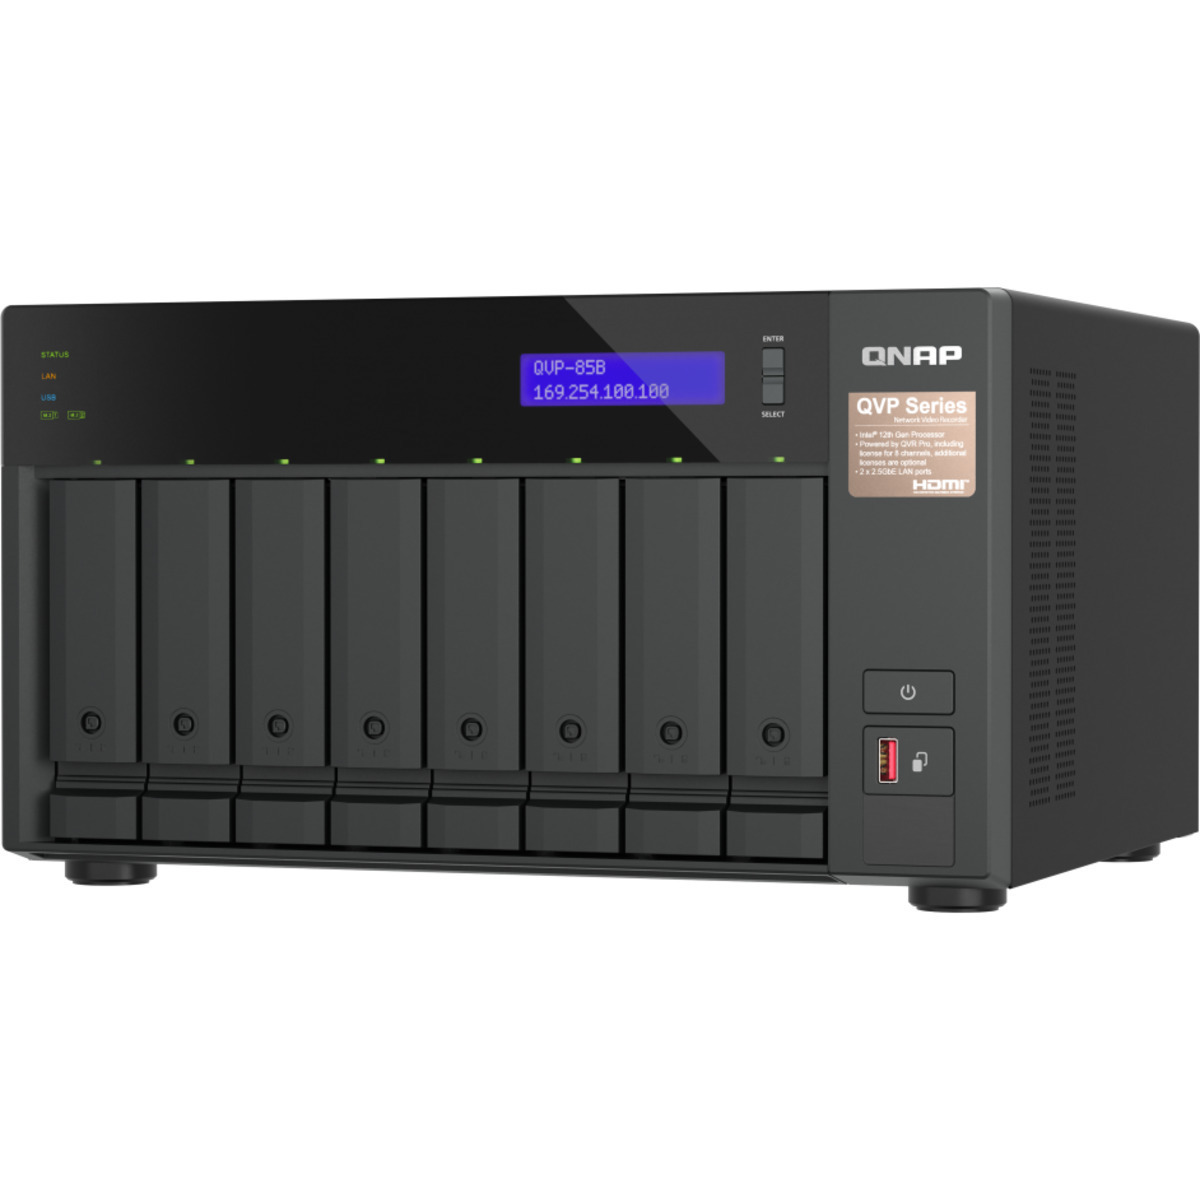 QNAP QVP-85B 42tb 8-Bay Desktop Multimedia / Power User / Business NVR - Network Video Recorder 7x6tb Seagate IronWolf ST6000VN006 3.5 5400rpm SATA 6Gb/s HDD NAS Class Drives Installed - Burn-In Tested QVP-85B